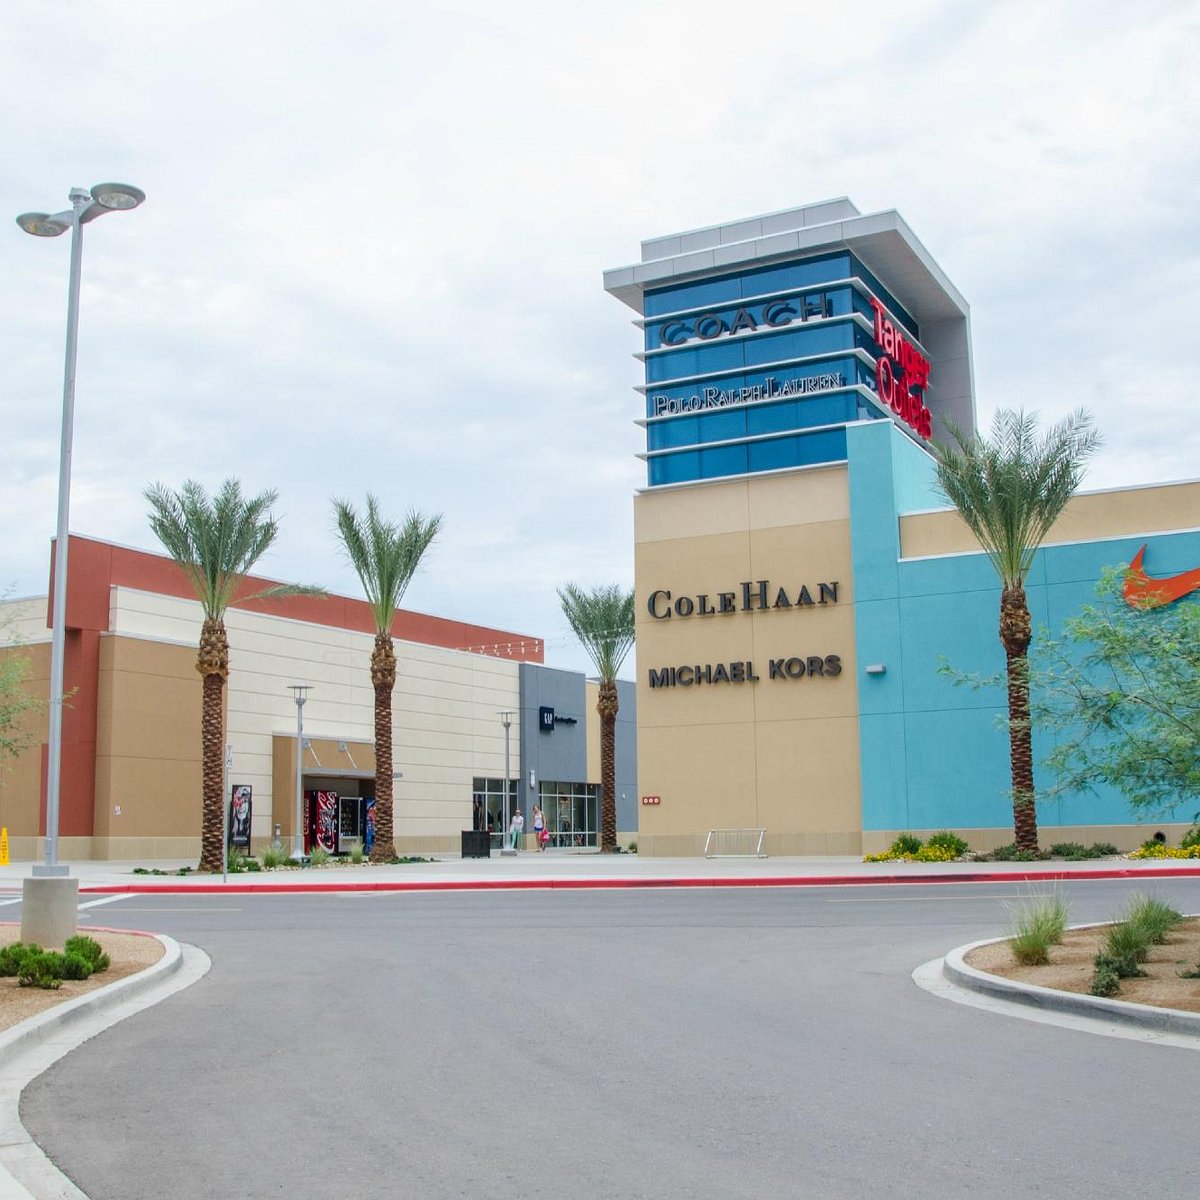 TangerOutlets opens its doors to Fort Worth shoppers; Nike, Cole Haan, H&M  among the 70 stores